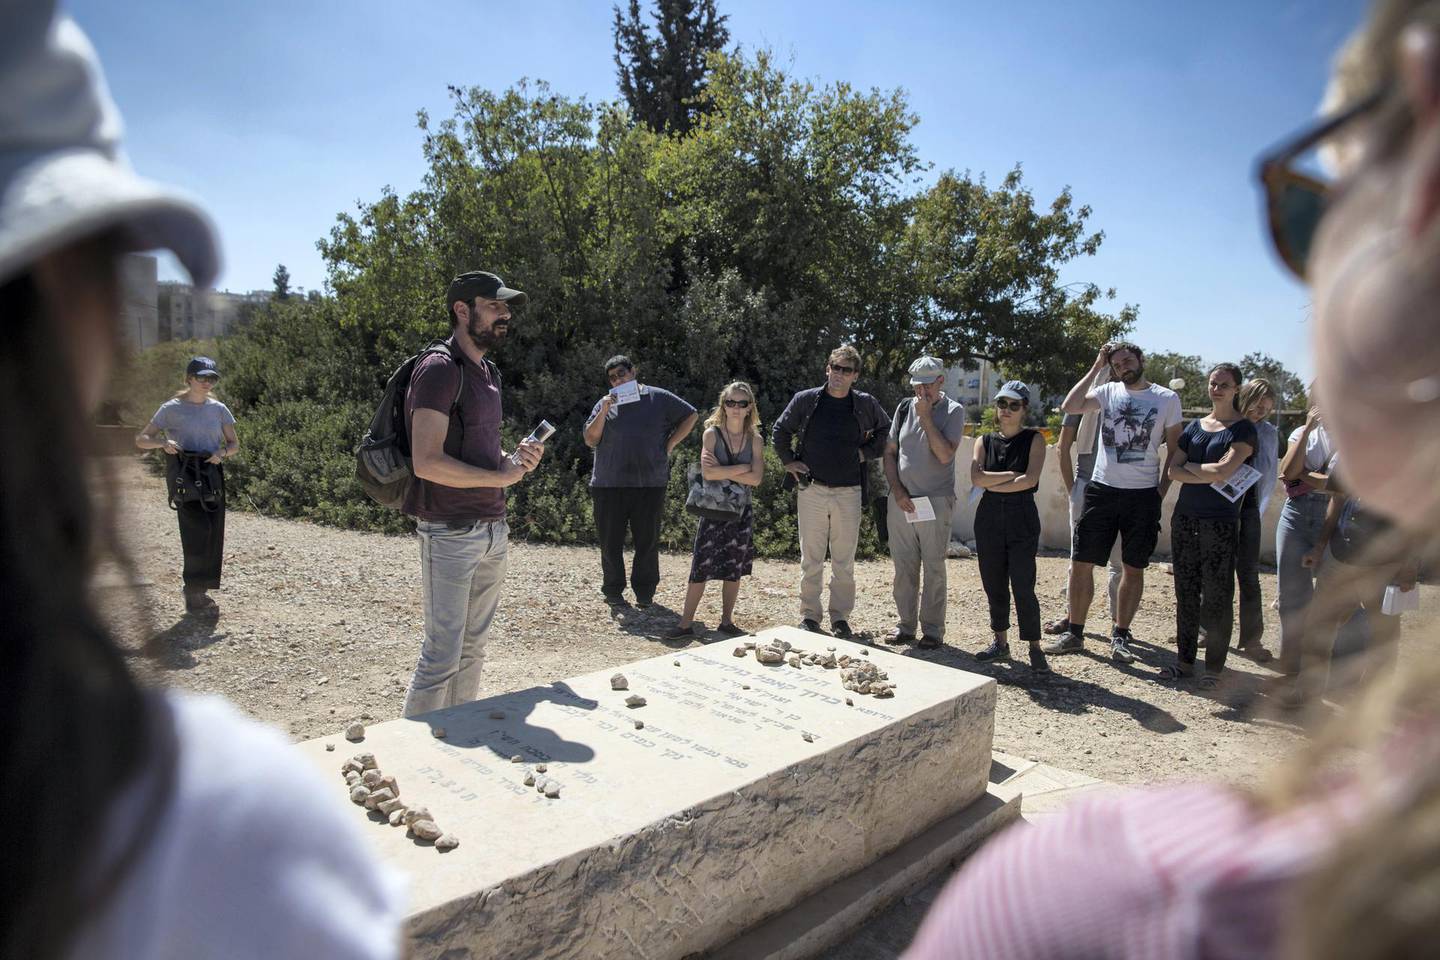 Ido Even-Paz , member of "Breaking the Silence" as speaks in English by the grave of American Israeli Jewish settler Baruch Goldstein who killed 29 Palestinians and wounded 125 during the 1994 massacre at the Cave of the Patriachs. He also lead the tour through the divided enclave of Hebron where about 900 Jewish settlers live . (Photo by Heidi Levine for The National).